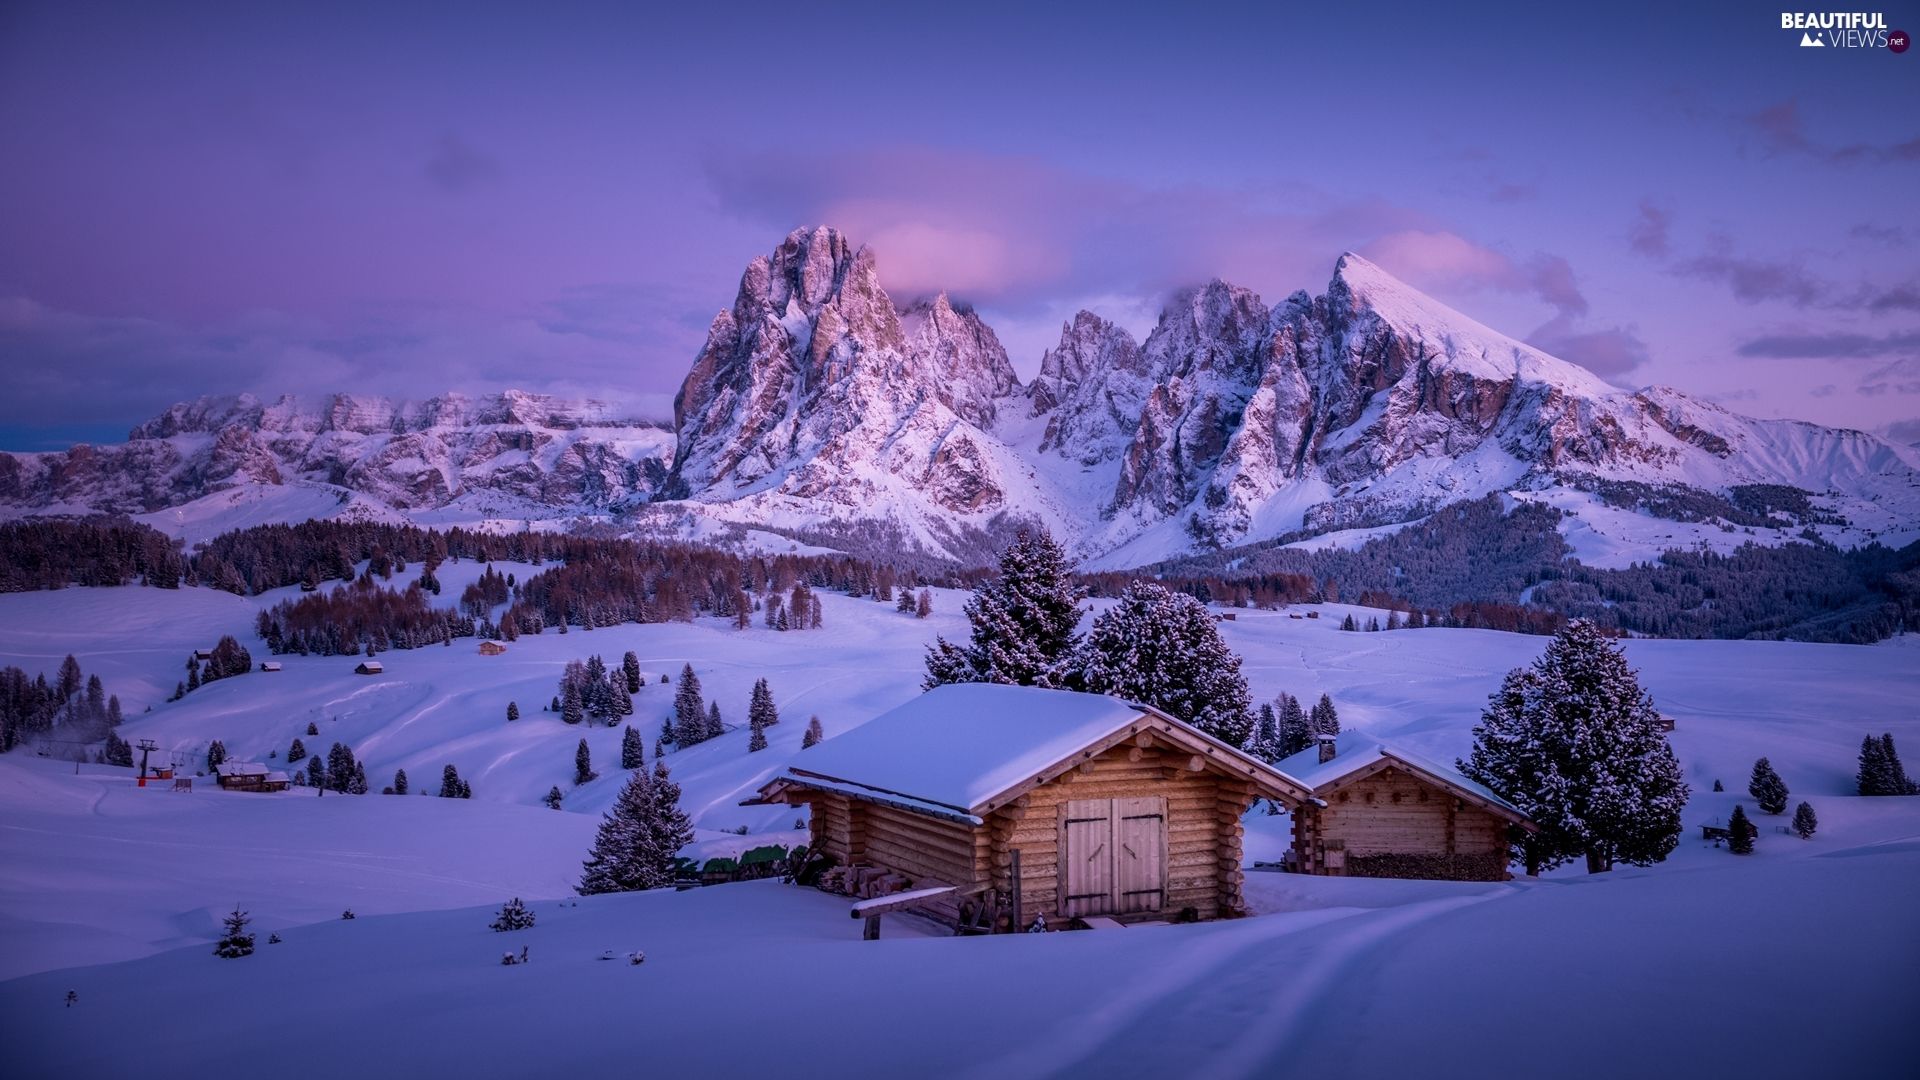 Trentino Alto Adige, Italy, Dolomites Mountains, Seiser Alm Meadow, Houses, Clouds, Trees, Viewes, Winter Views Wallpaper: 1920x1080